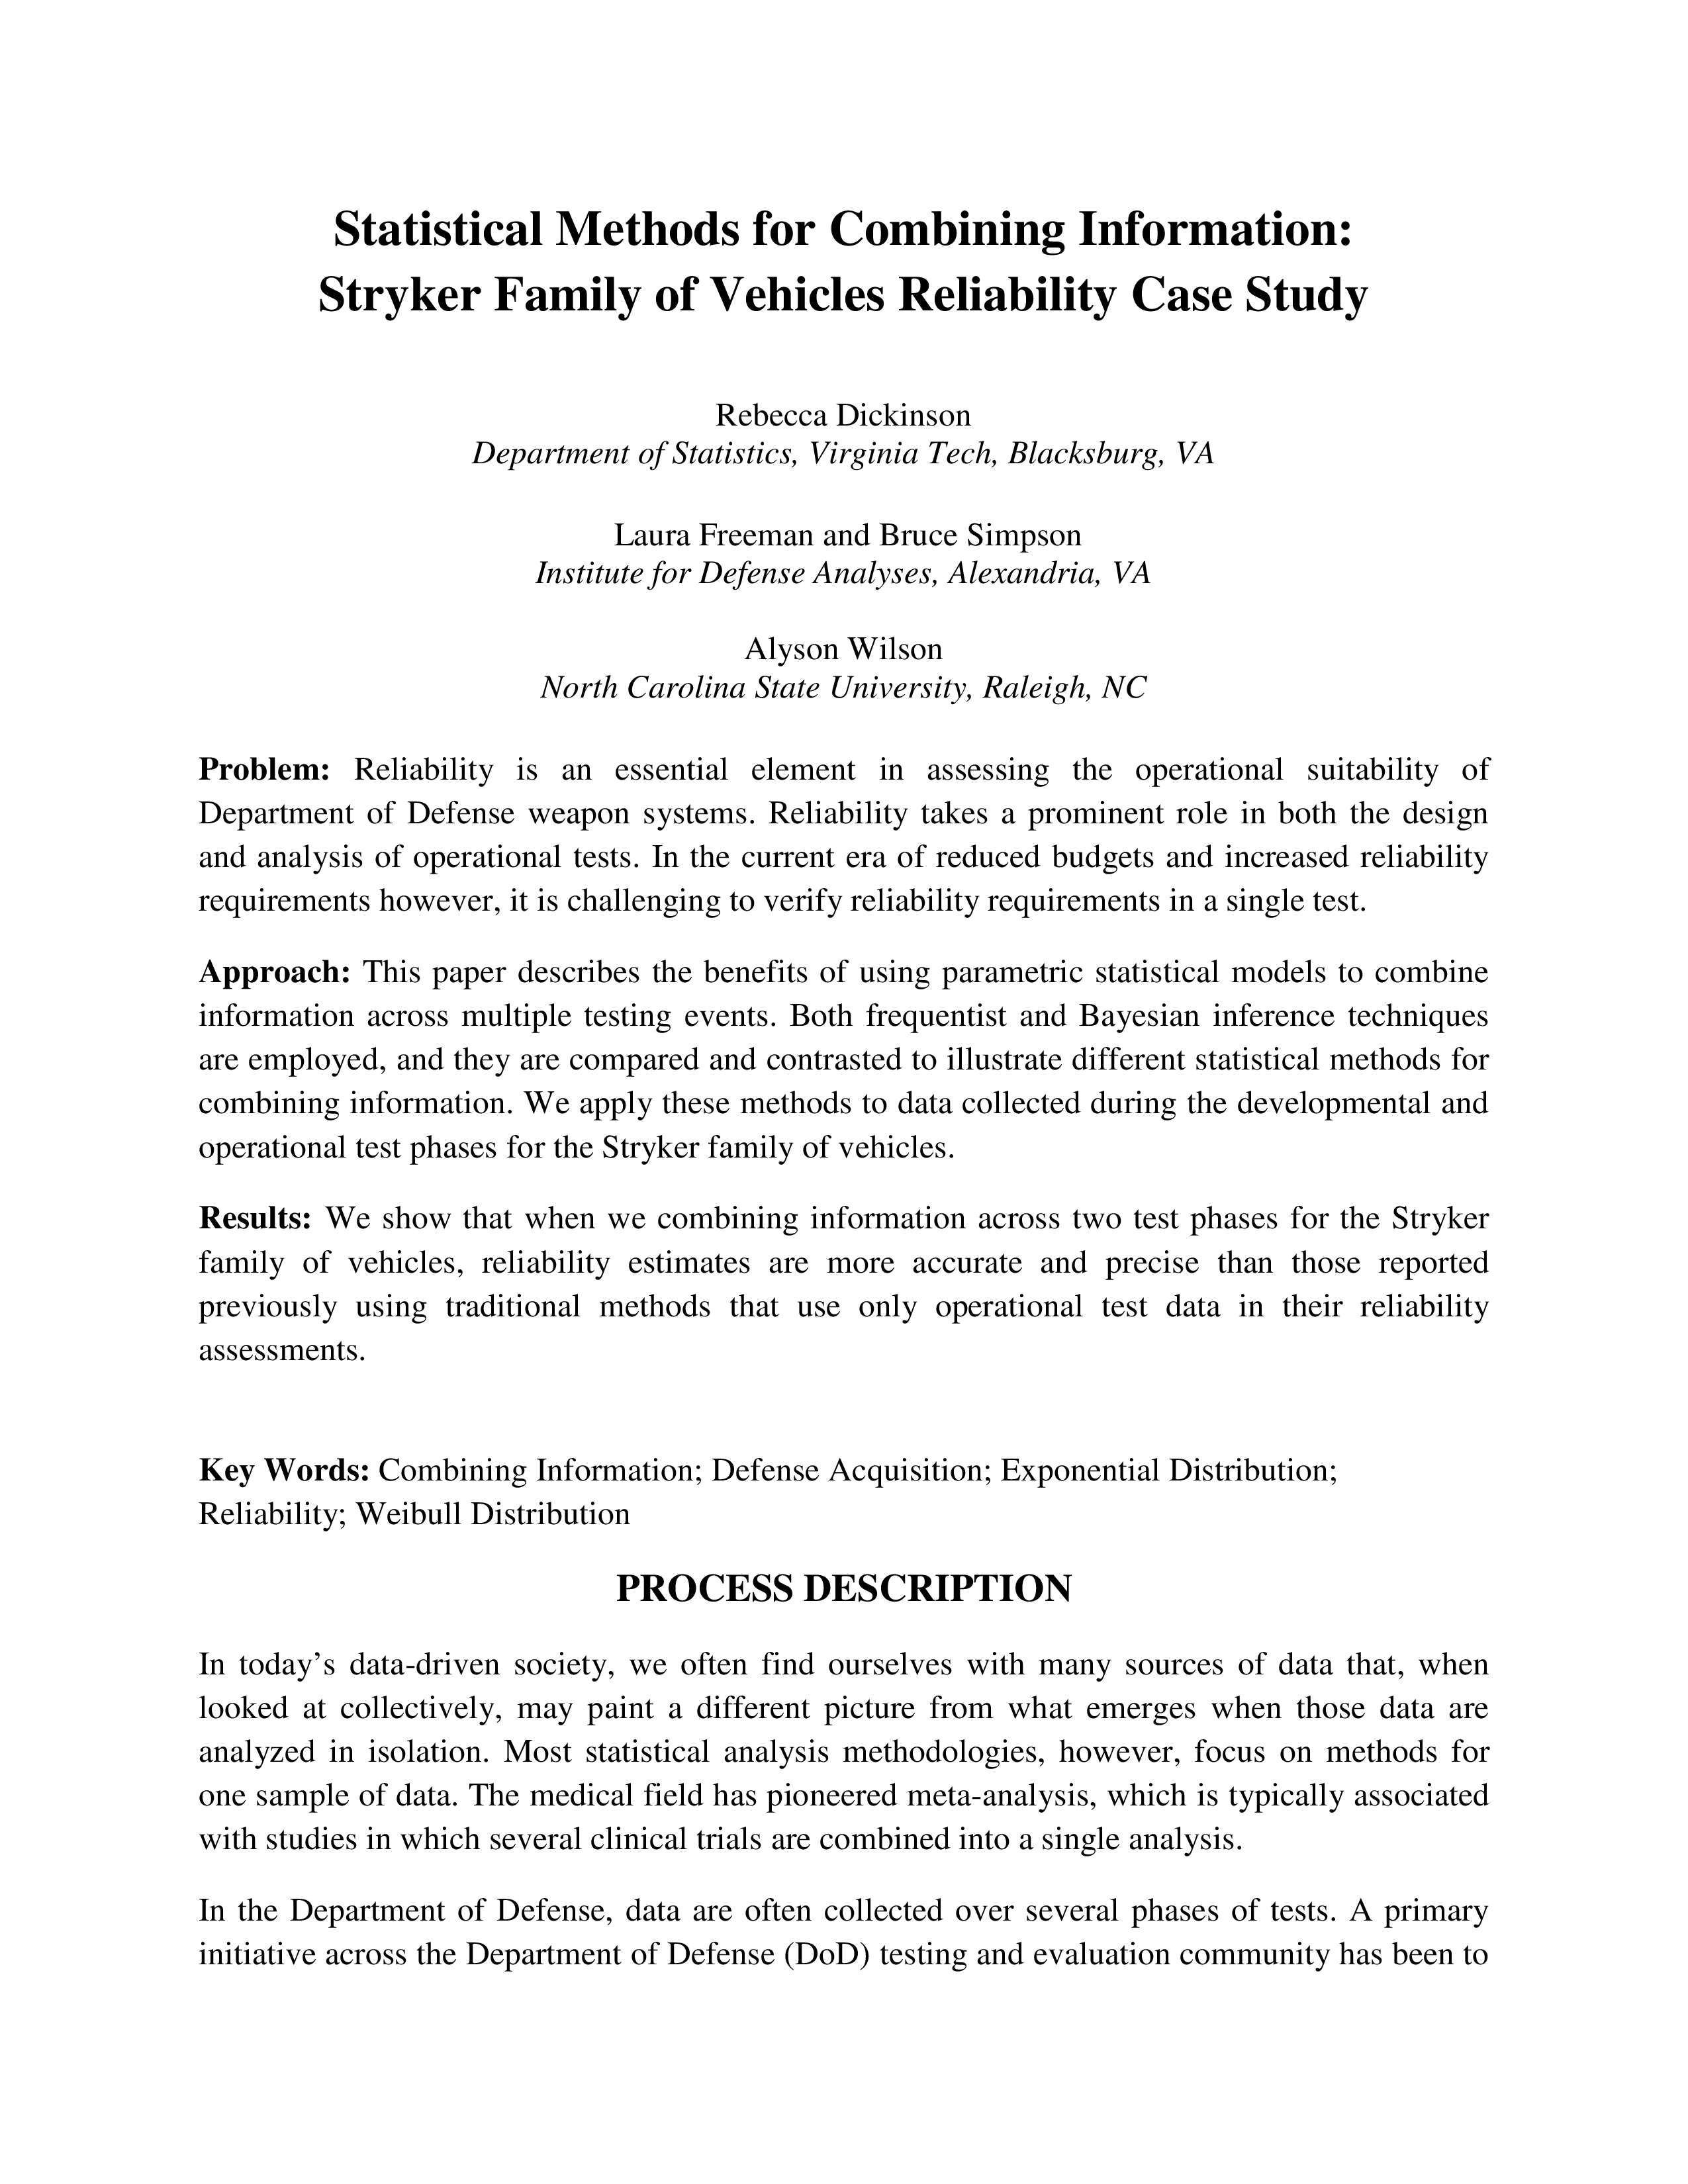 Statistical Methods for Combining Information: Stryker Family of Vehicles Reliability Case Study